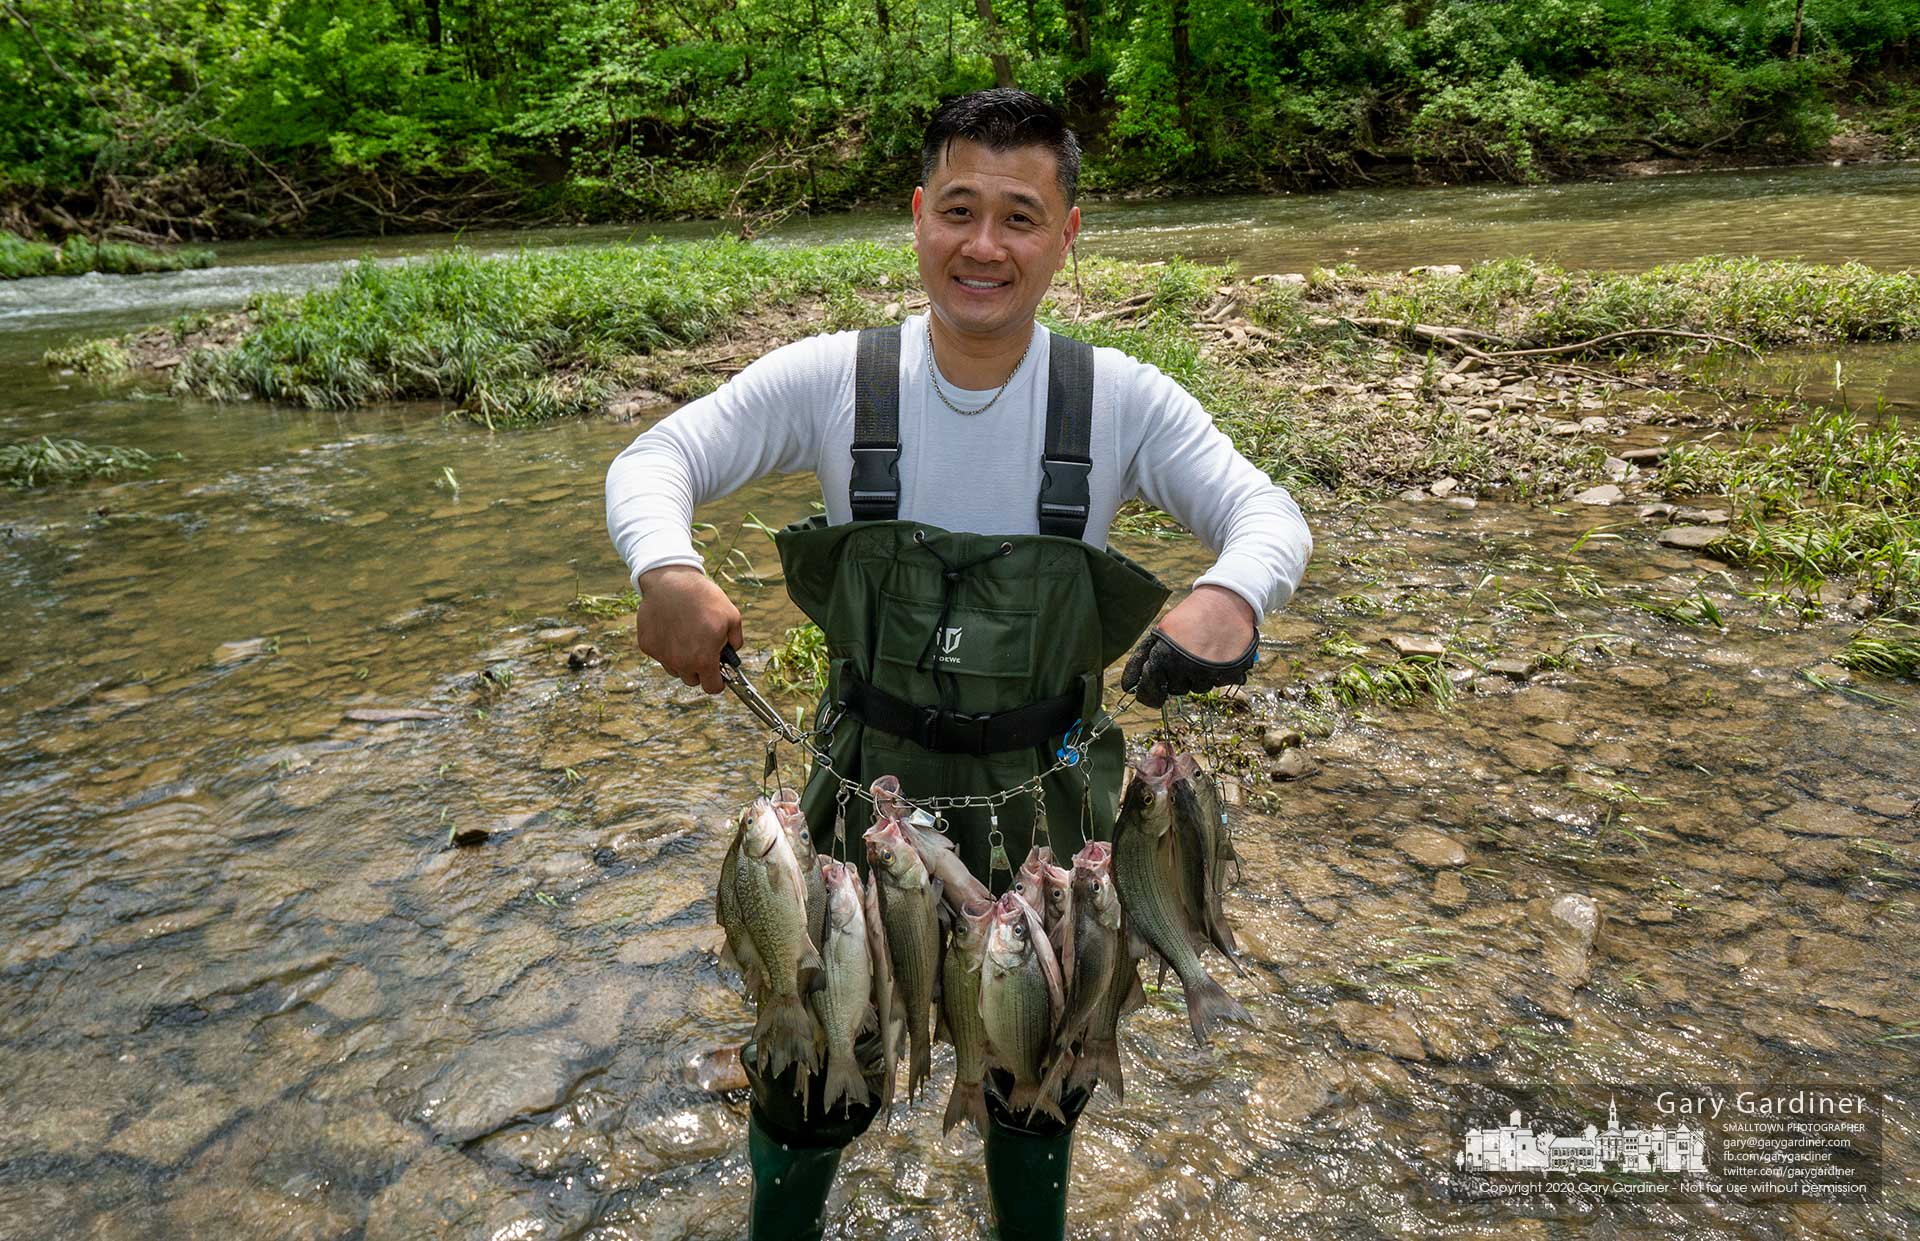 A fisherman proudly displays his catch from Big Walnut Creek in Galena before calling it a day on the rushing waters of the rain-swollen creek. My Final Photo for May 24, 2020.